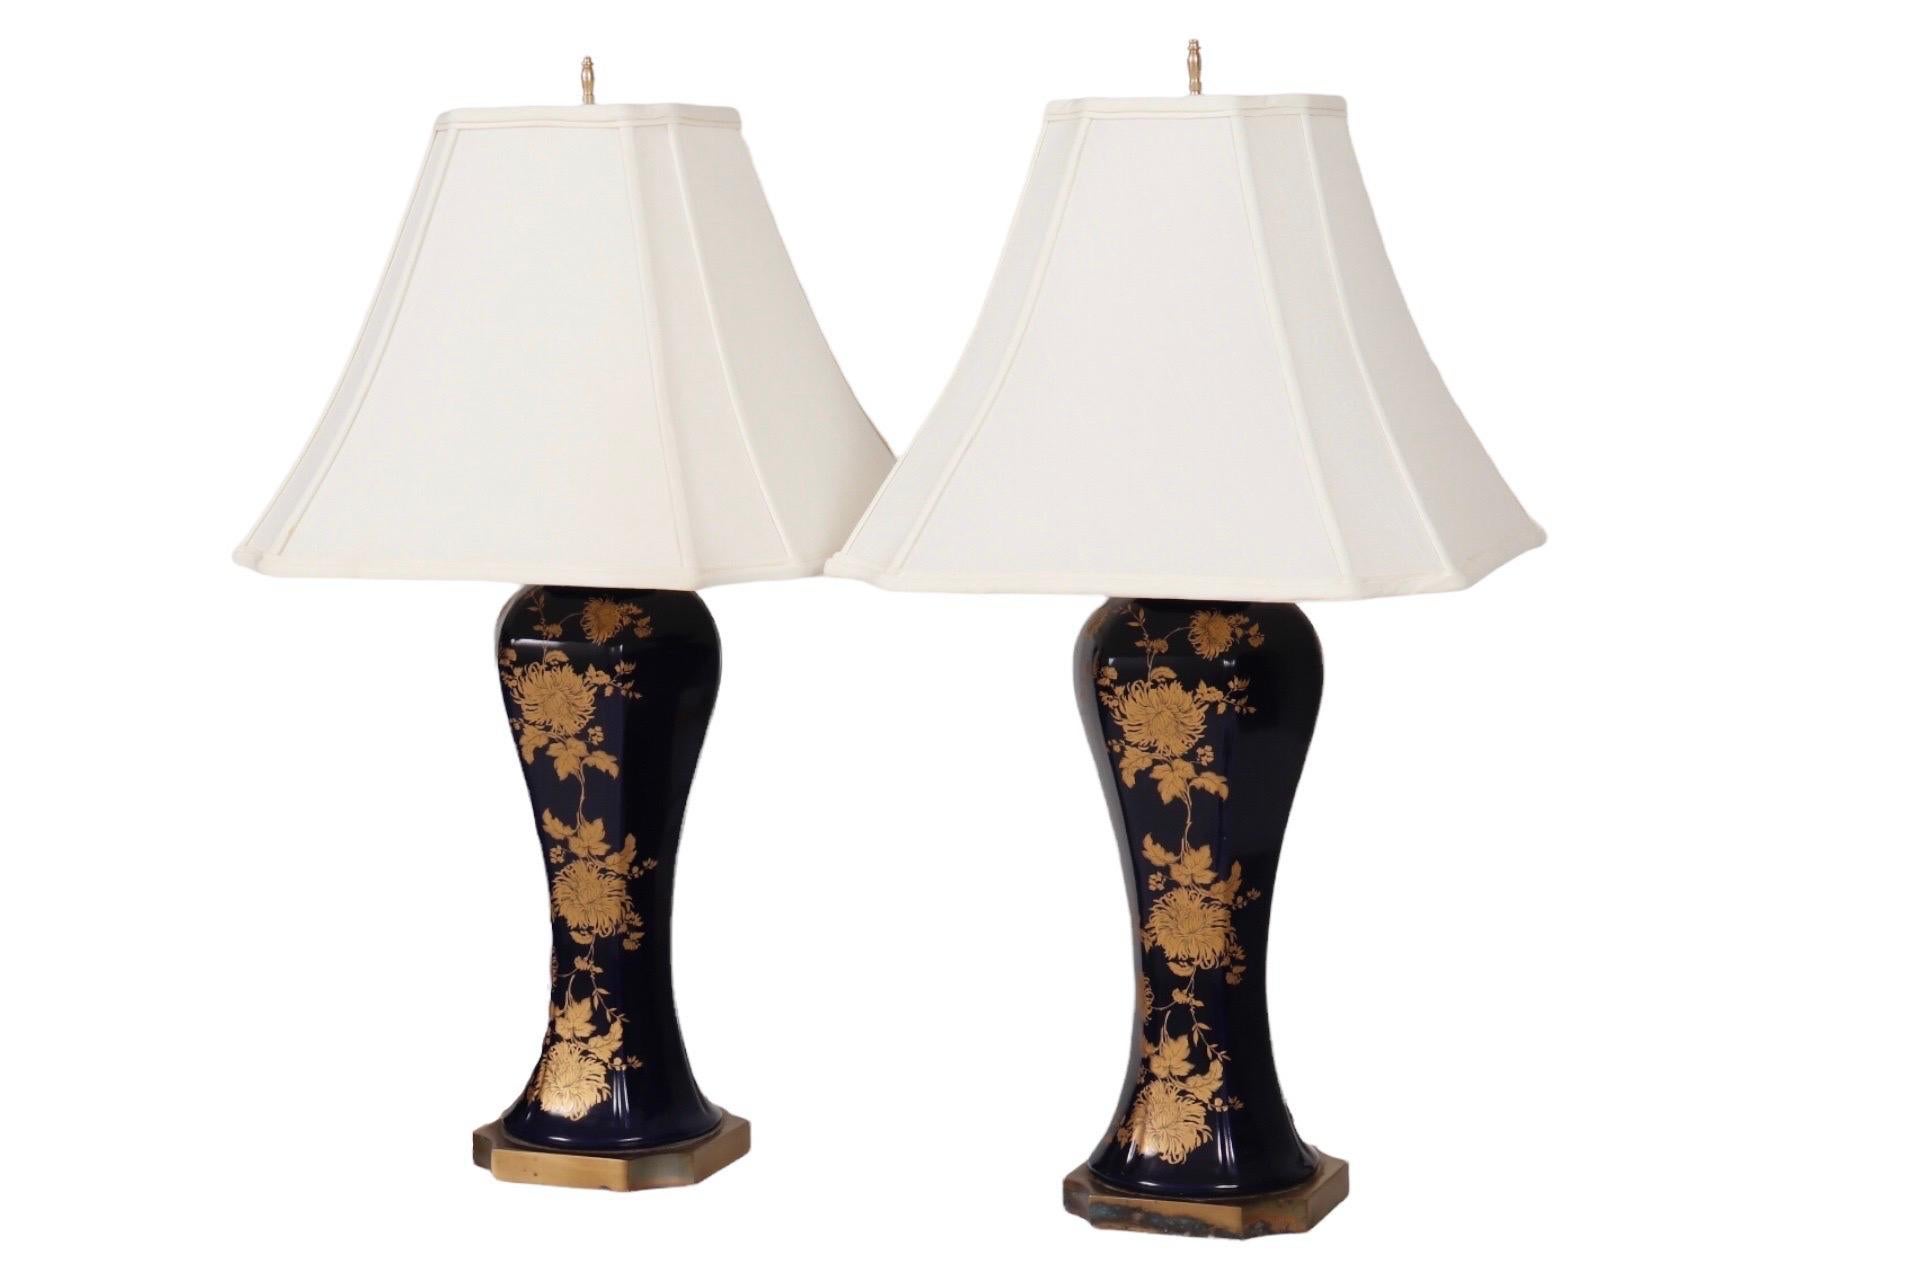 A pair of Japanese style ceramic table lamps in dark blue and gold. Urn shaped vases are exquisitely decorated with golden chrysanthemums and foliage, the oriental symbol for happiness and well being. Accompanying inverted square bell shades are